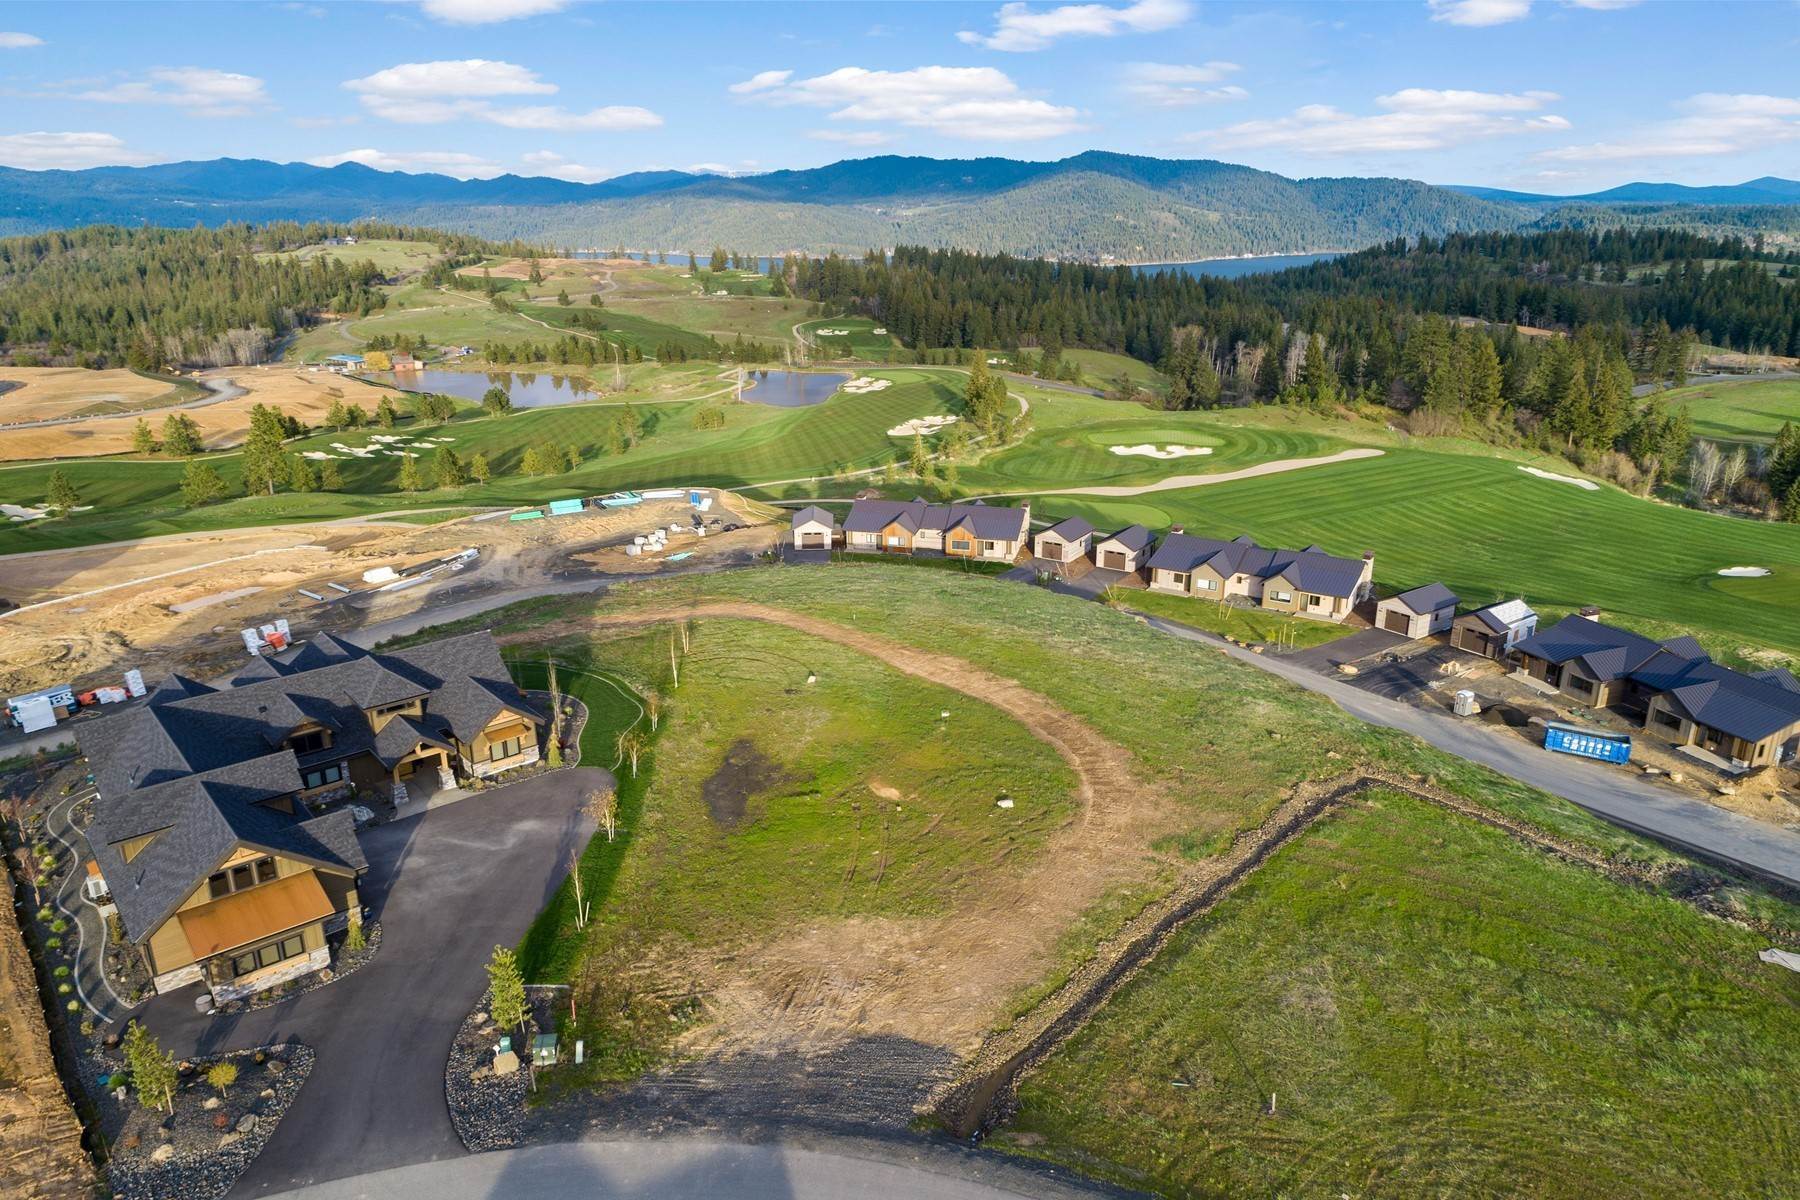 Land for Sale at Prime Homesite at CDA National 15527 S Chalone Dr Coeur d’Alene, Idaho 83814 United States